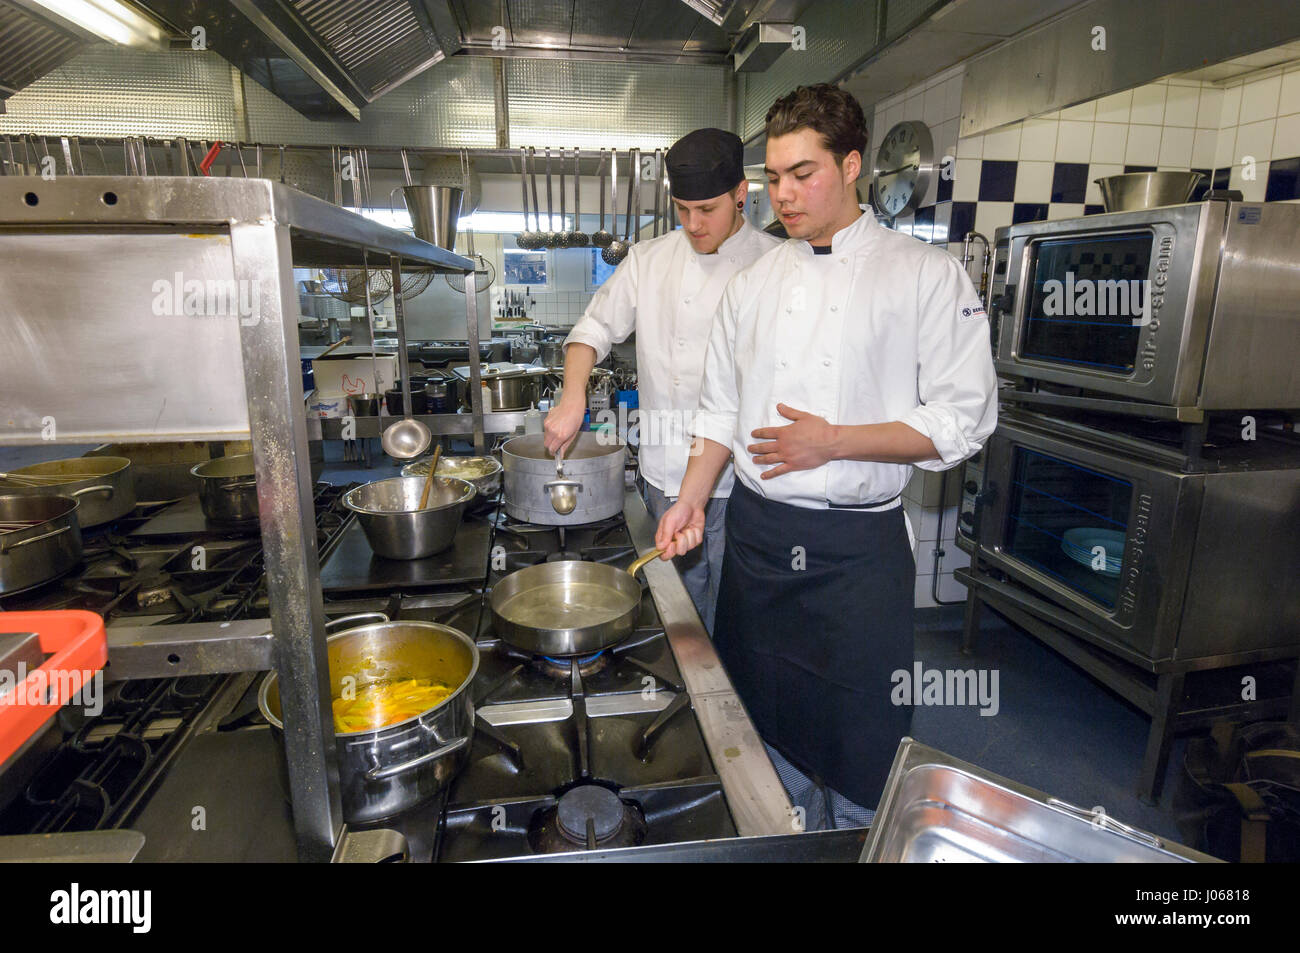 Students in a restaurant school learn to cook, Sweden. Stock Photo